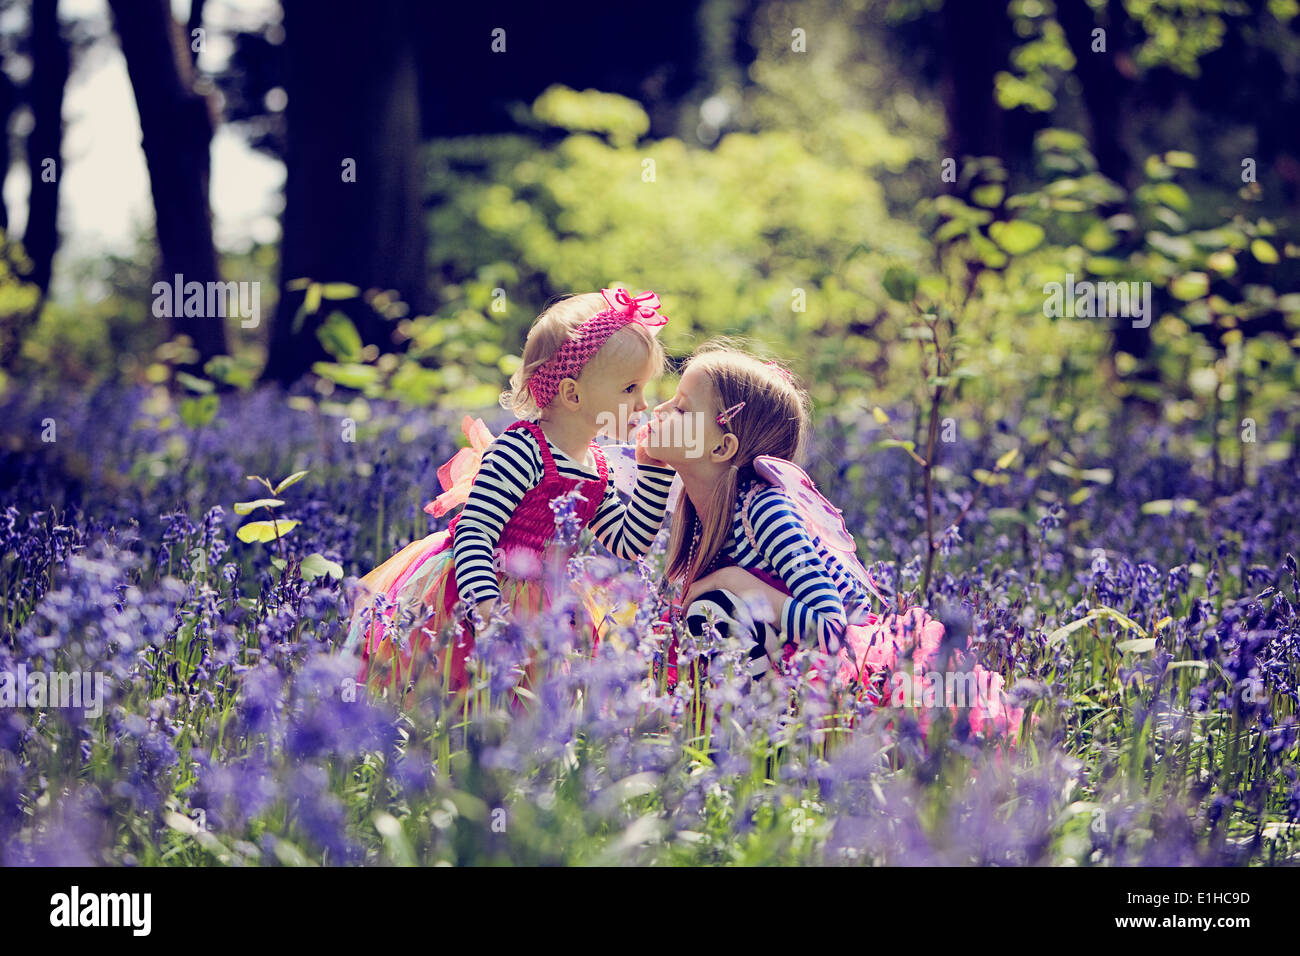 Two little girls in fairy dresses kissing innocently in an English woodland surrounded by bluebells in Spring. Stock Photo